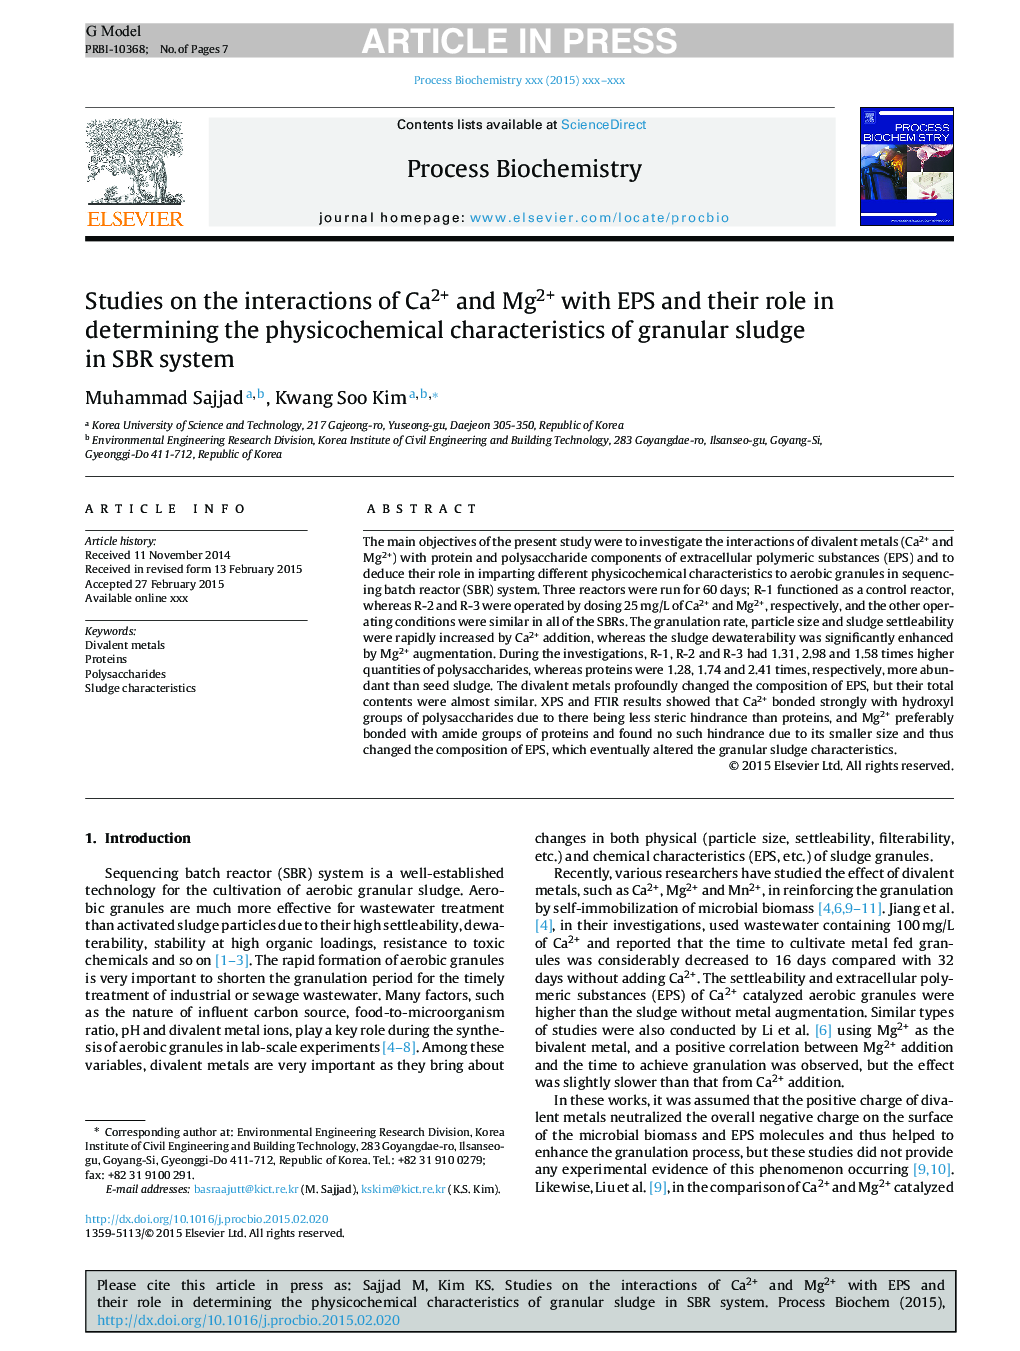 Studies on the interactions of Ca2+ and Mg2+ with EPS and their role in determining the physicochemical characteristics of granular sludges in SBR system